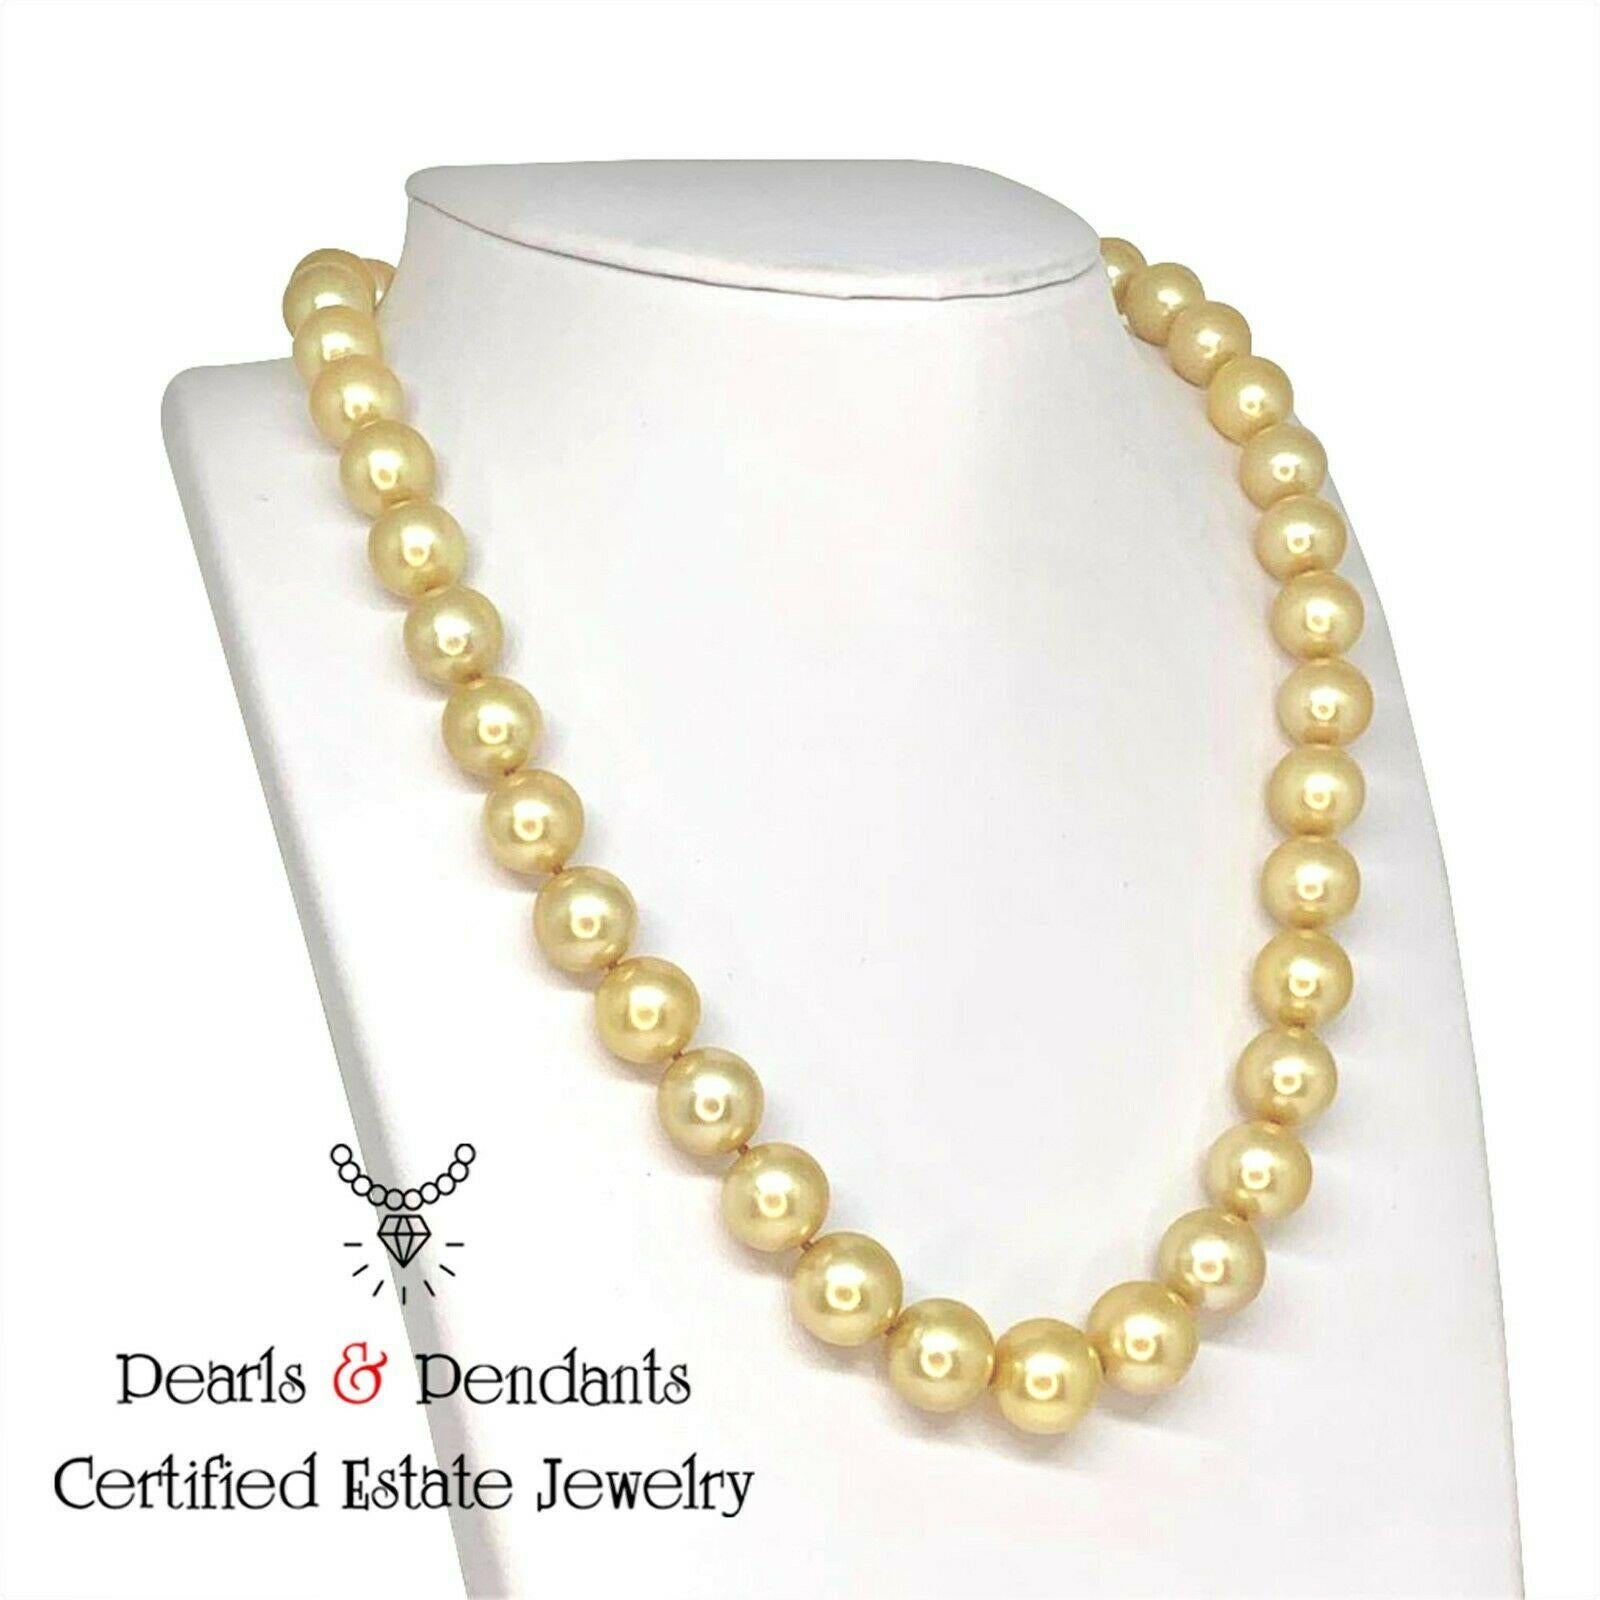 Estate Mikimoto South Sea Golden 39 LARGE Pearls 12.00-9.90 mm 18 Inch 18 KT Gold Clasp

Nothing says, 